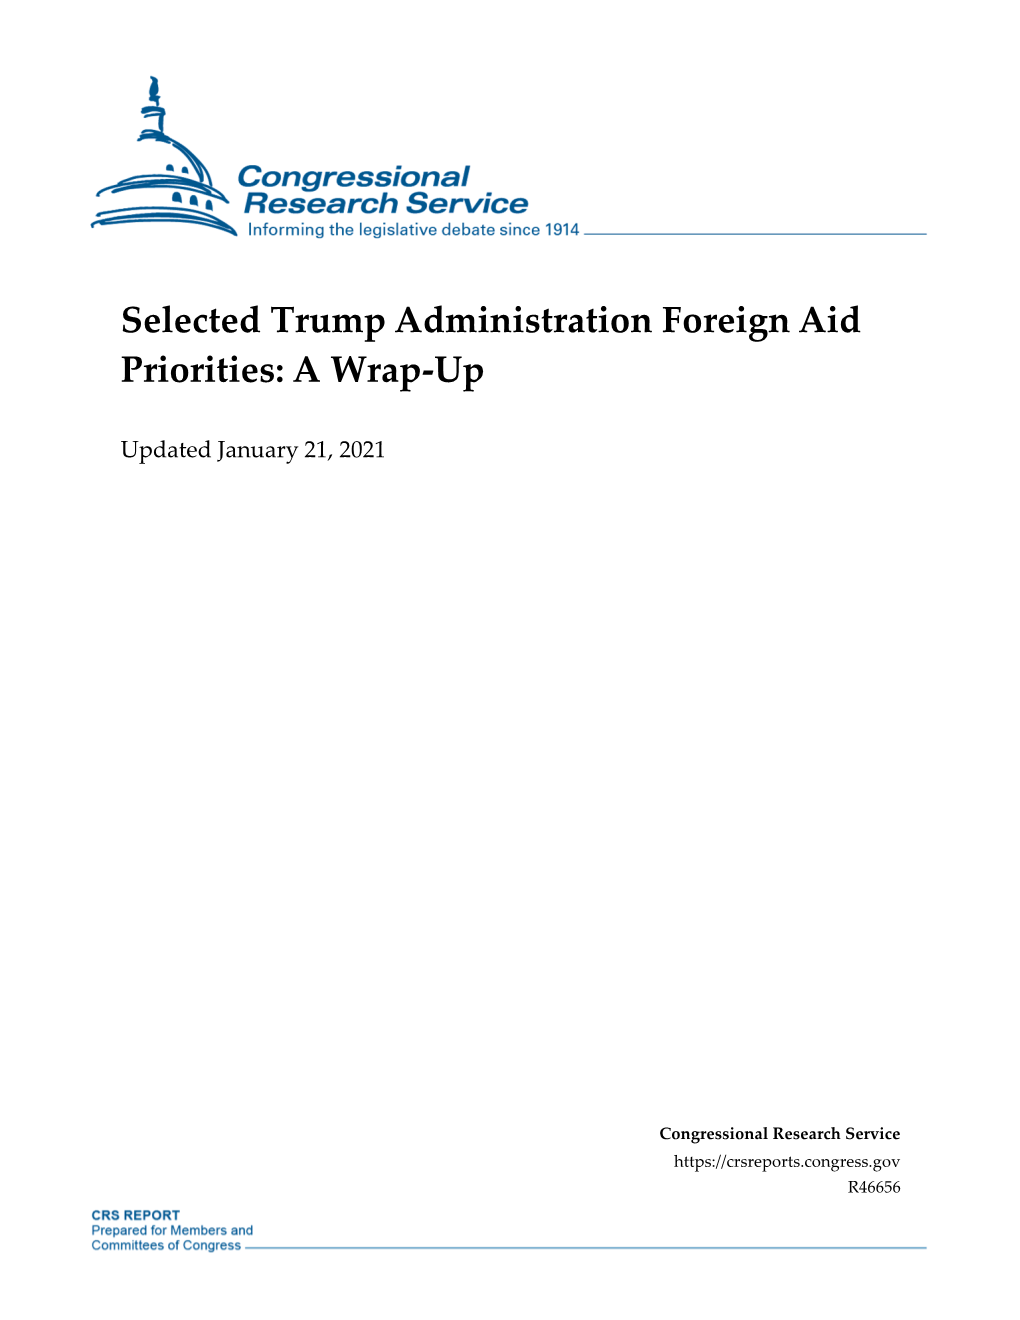 Selected Trump Administration Foreign Aid Priorities: a Wrap-Up